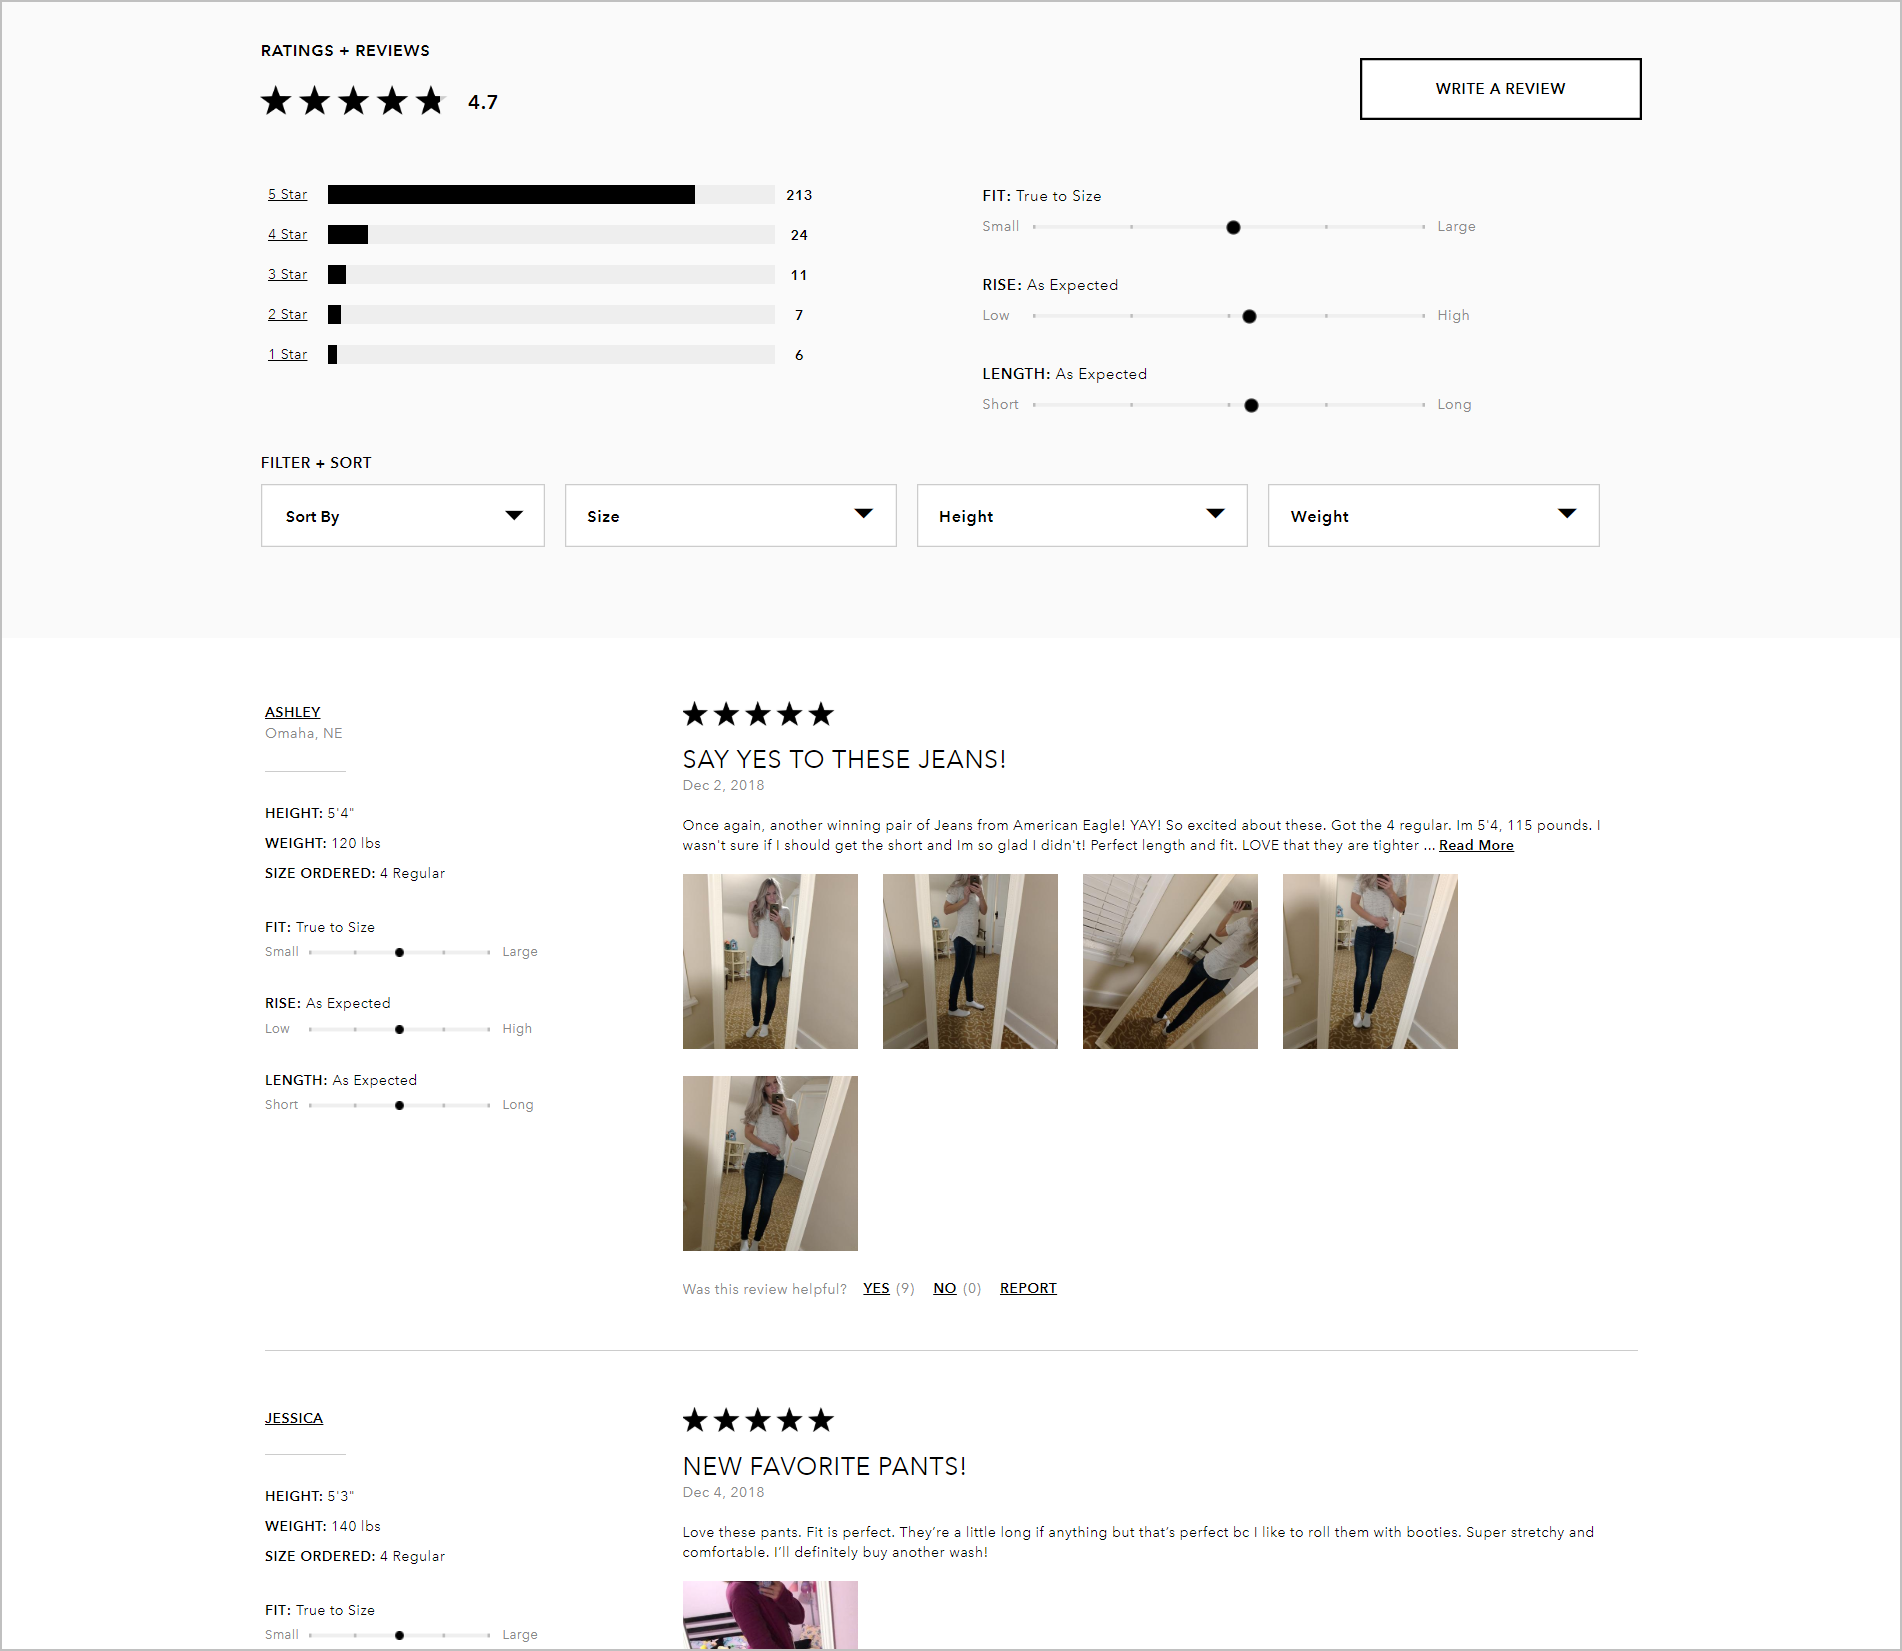 The ratings and reviews section of American Eagle's product detail page which allows users to filter and sort reviews by size, height, and weight of the reviewers. 